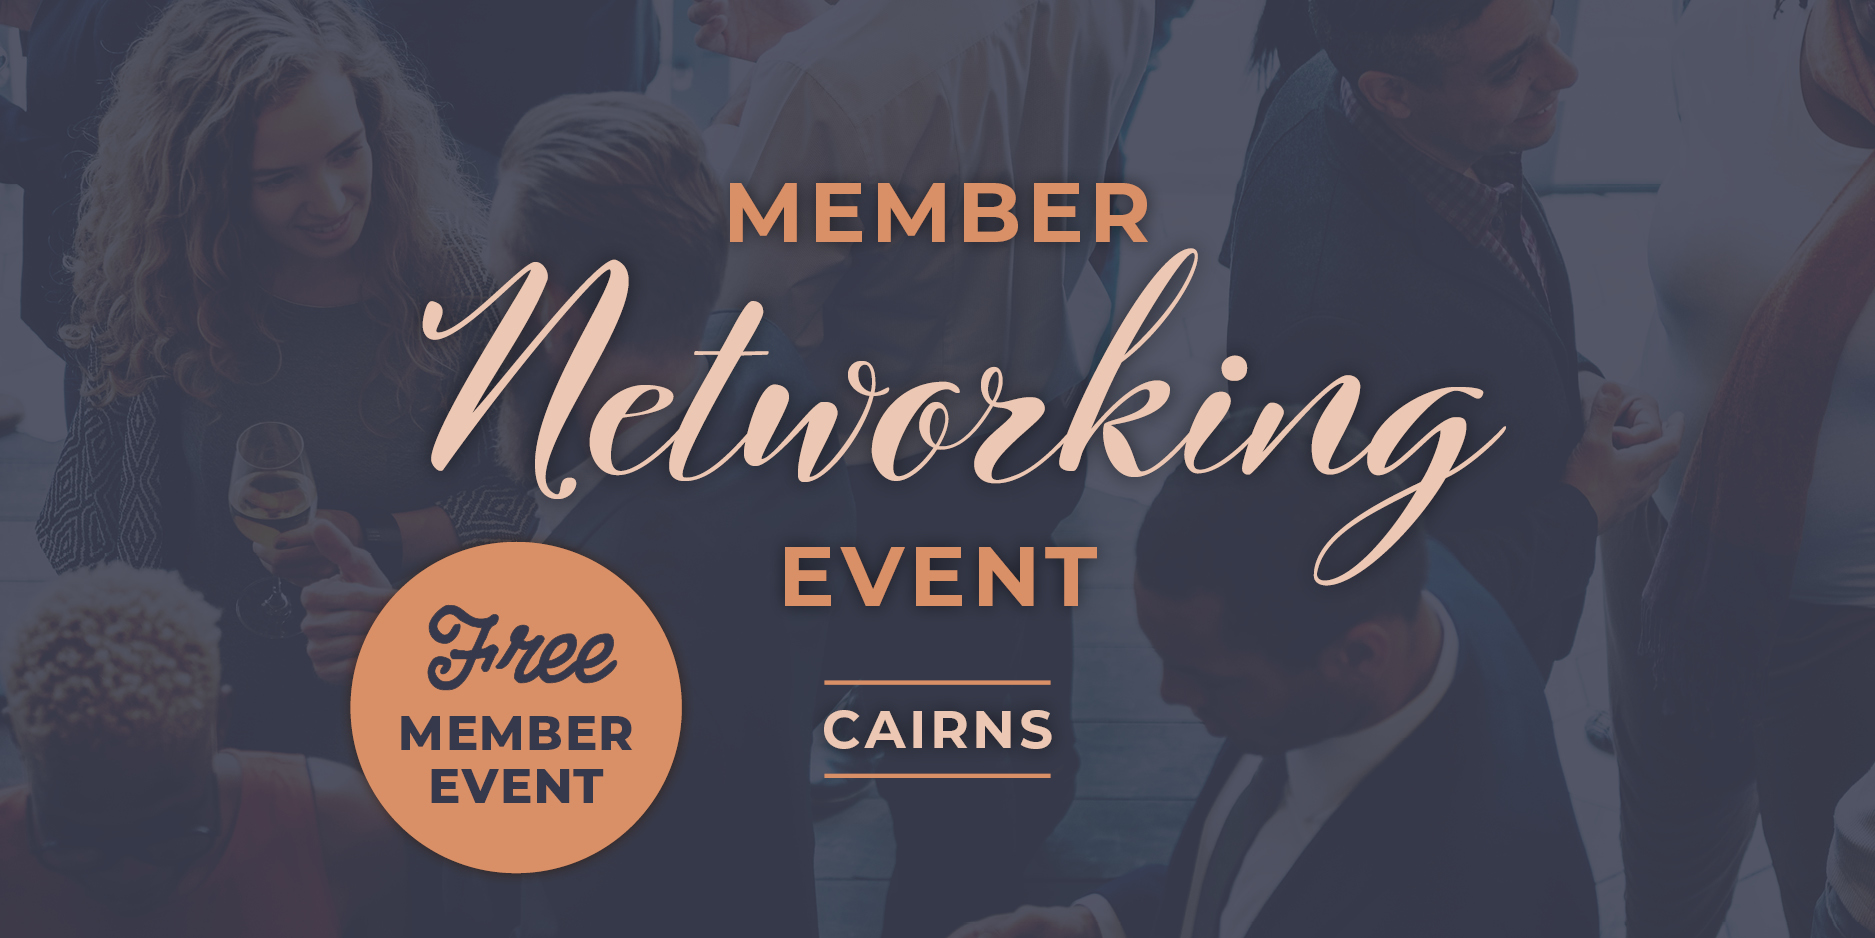 Member networking event - Cairns